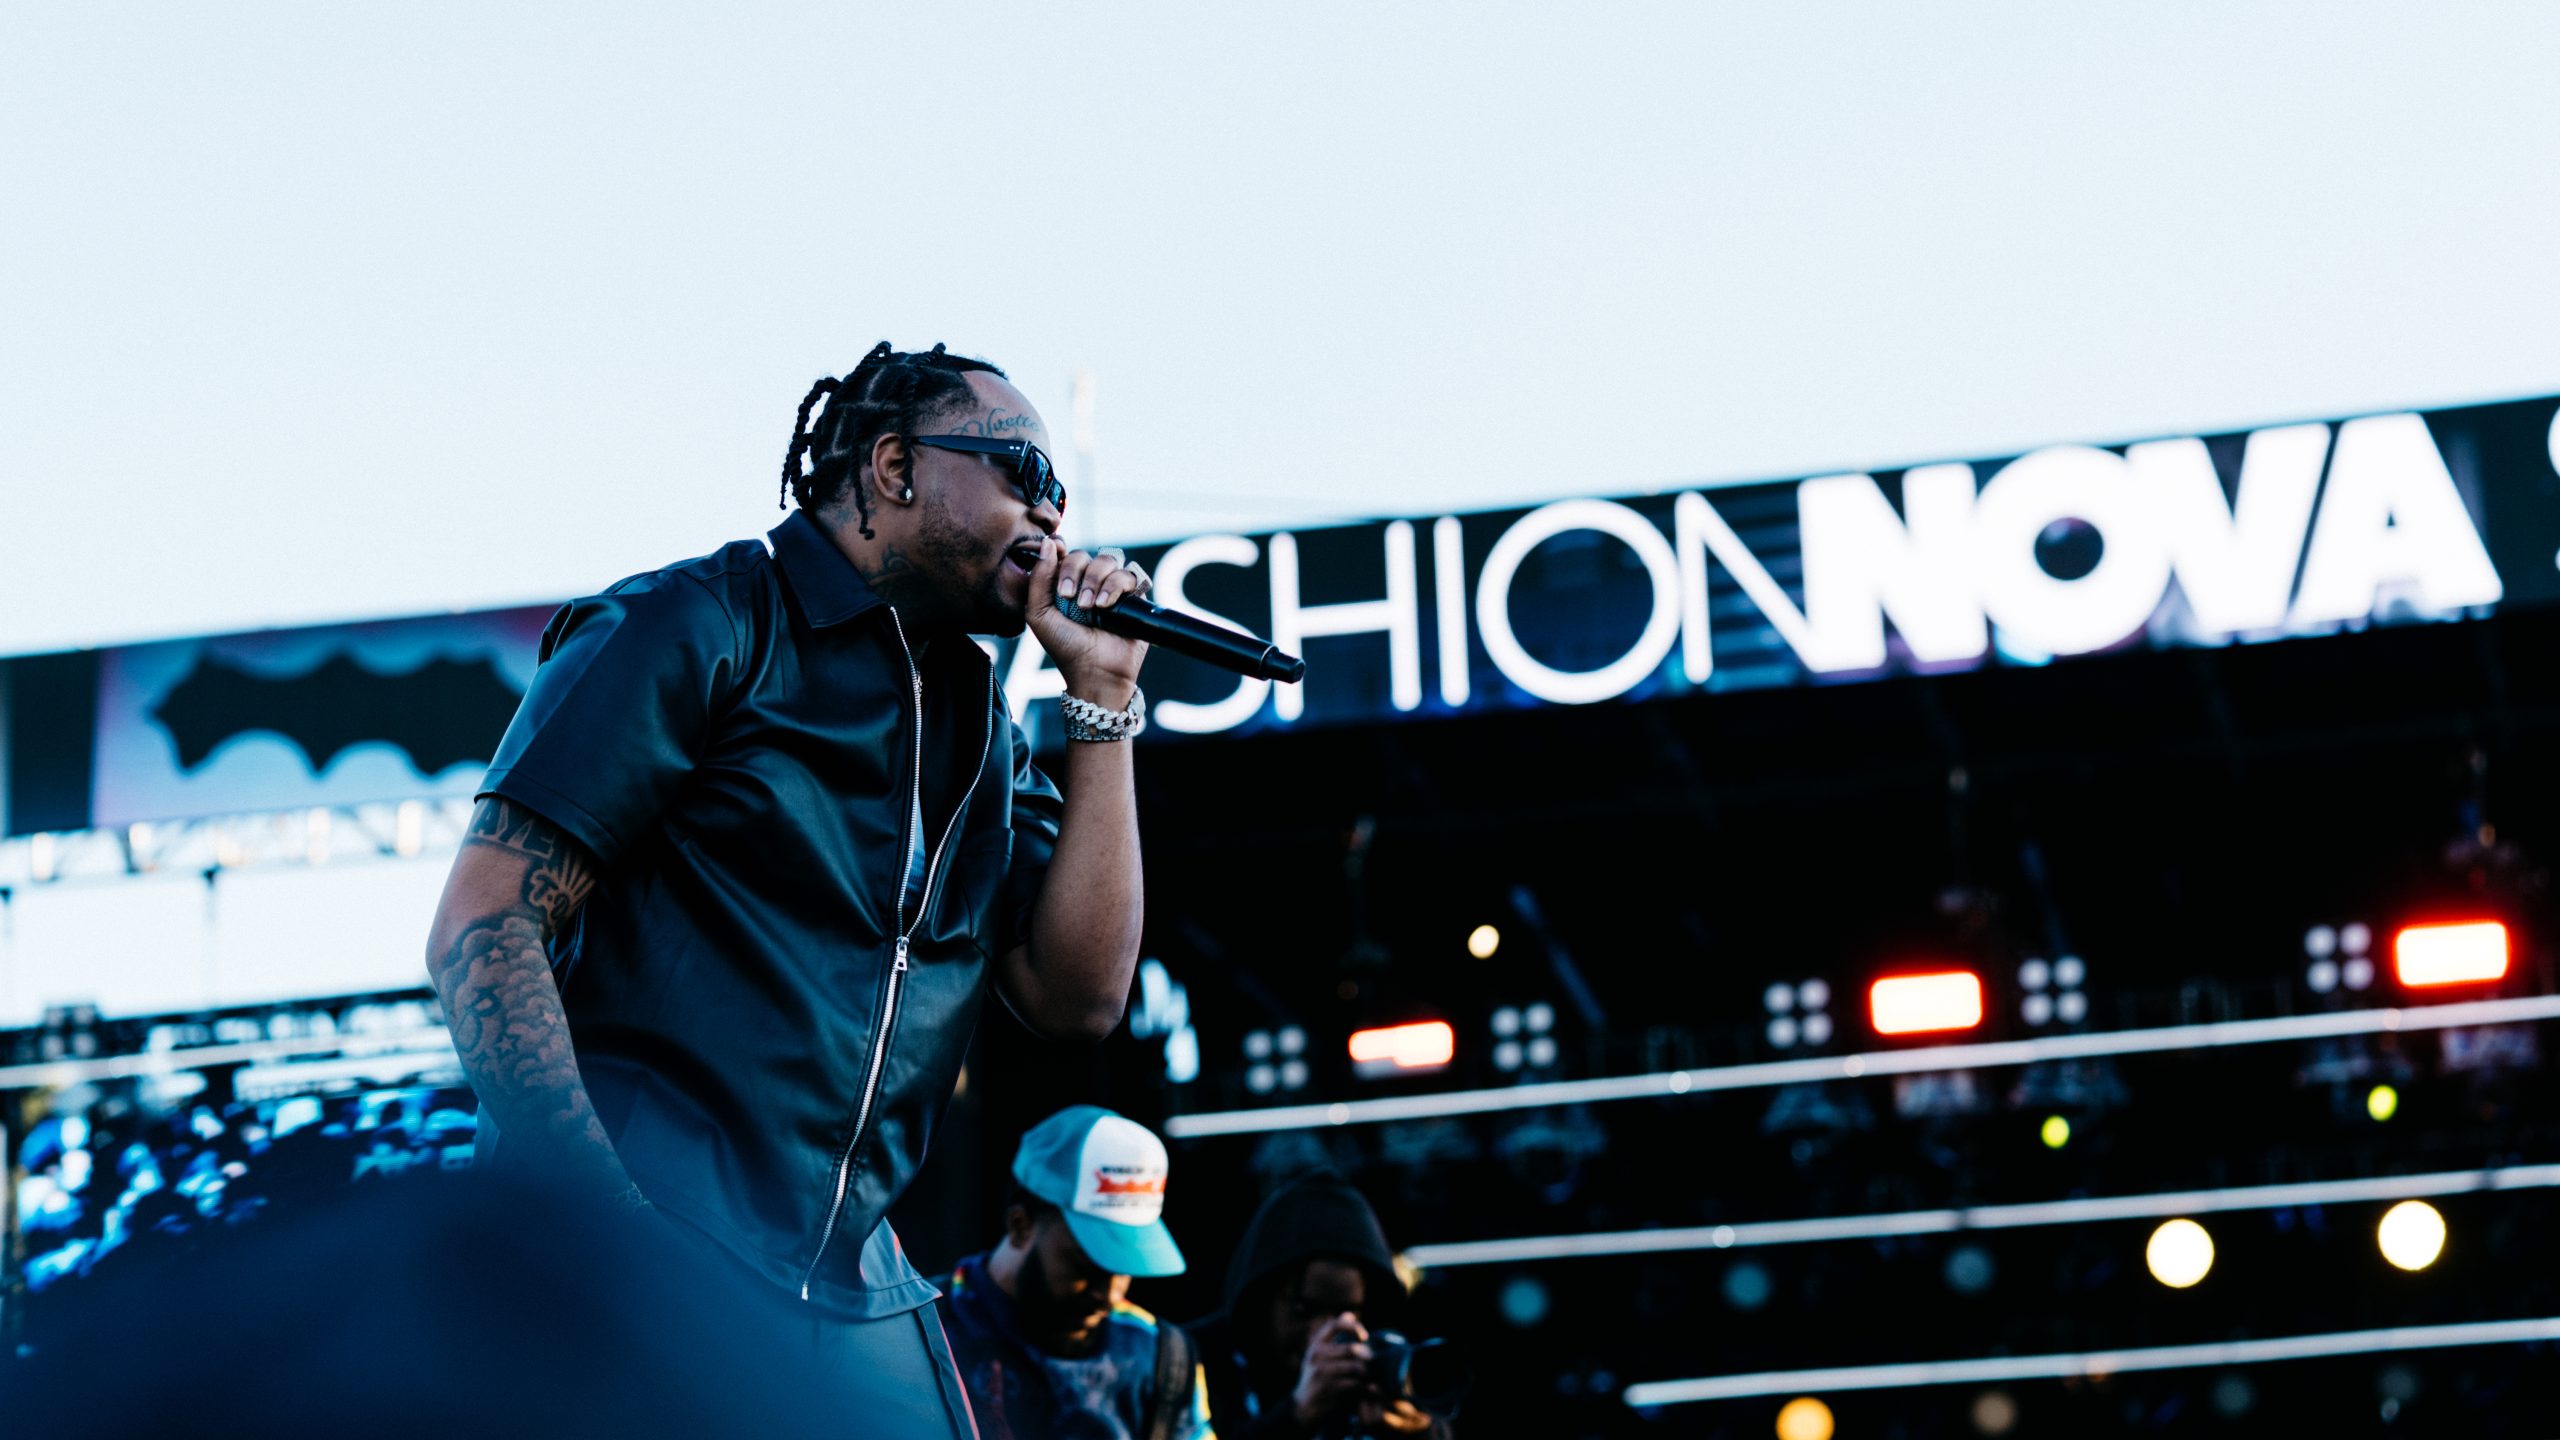 Fivio Foreign performs at the Fashion Nova Stage at Rolling Loud New York 2022 at Citi Field in Queens, New York on Sunday, September 25. PHOTO CREDIT: Meraki House for Fashion Nova